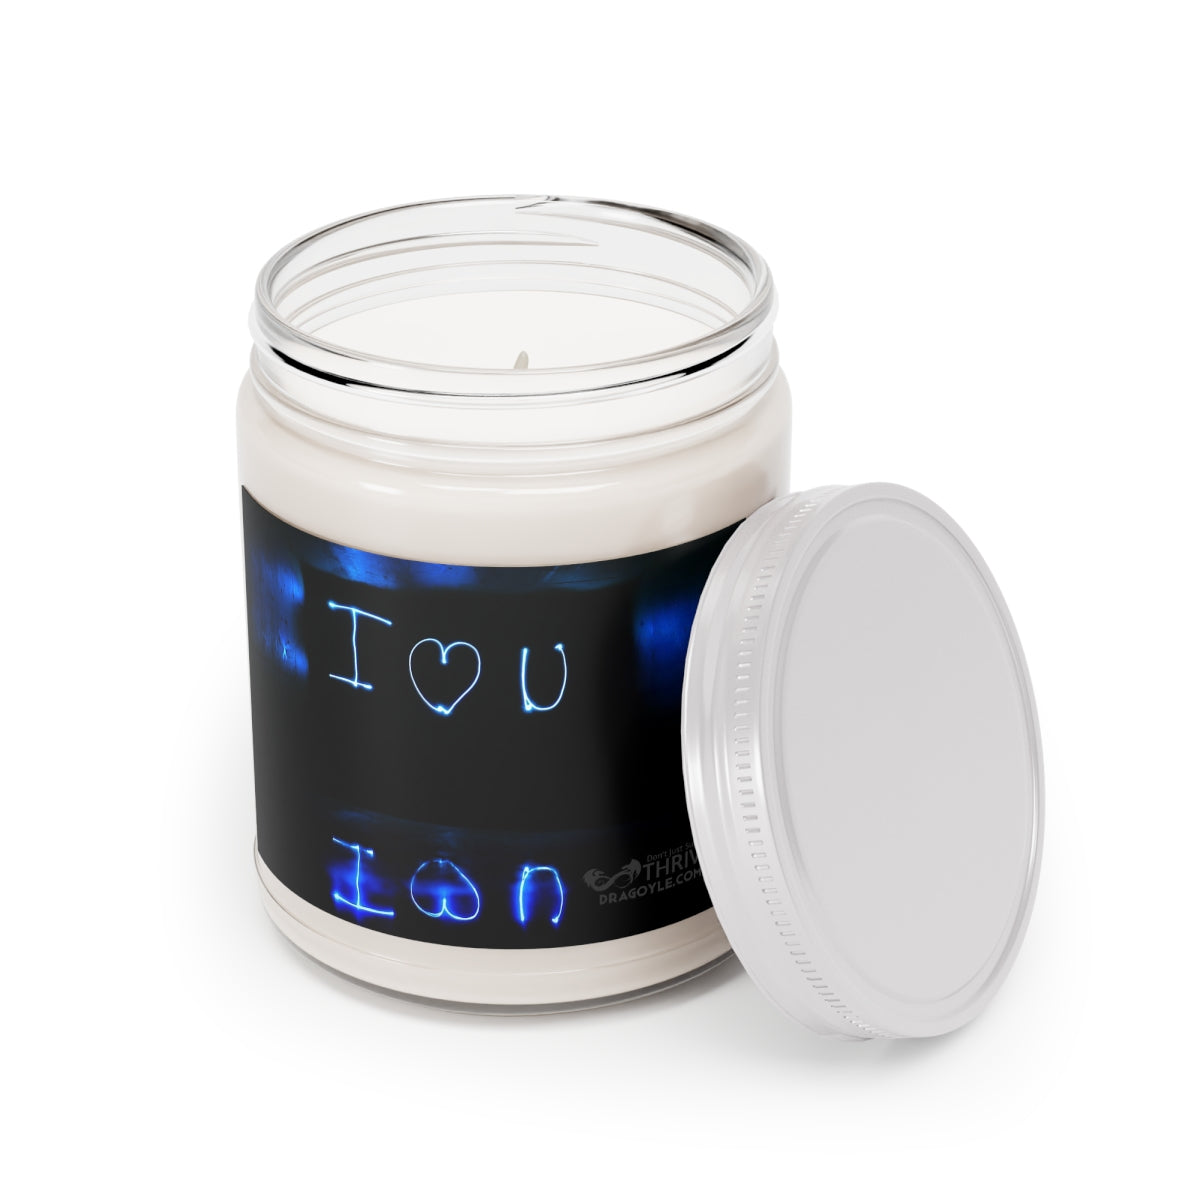  This custom candle jar can accommodate all your ideas, artwork, or inspirational quotes on its custom candle label. The candle itself is made 100% with a natural soy wax blend and cotton wick. Choose between ambrosial fragrances such as Vanilla Bean, Comfort Spice, and Sea Breeze.